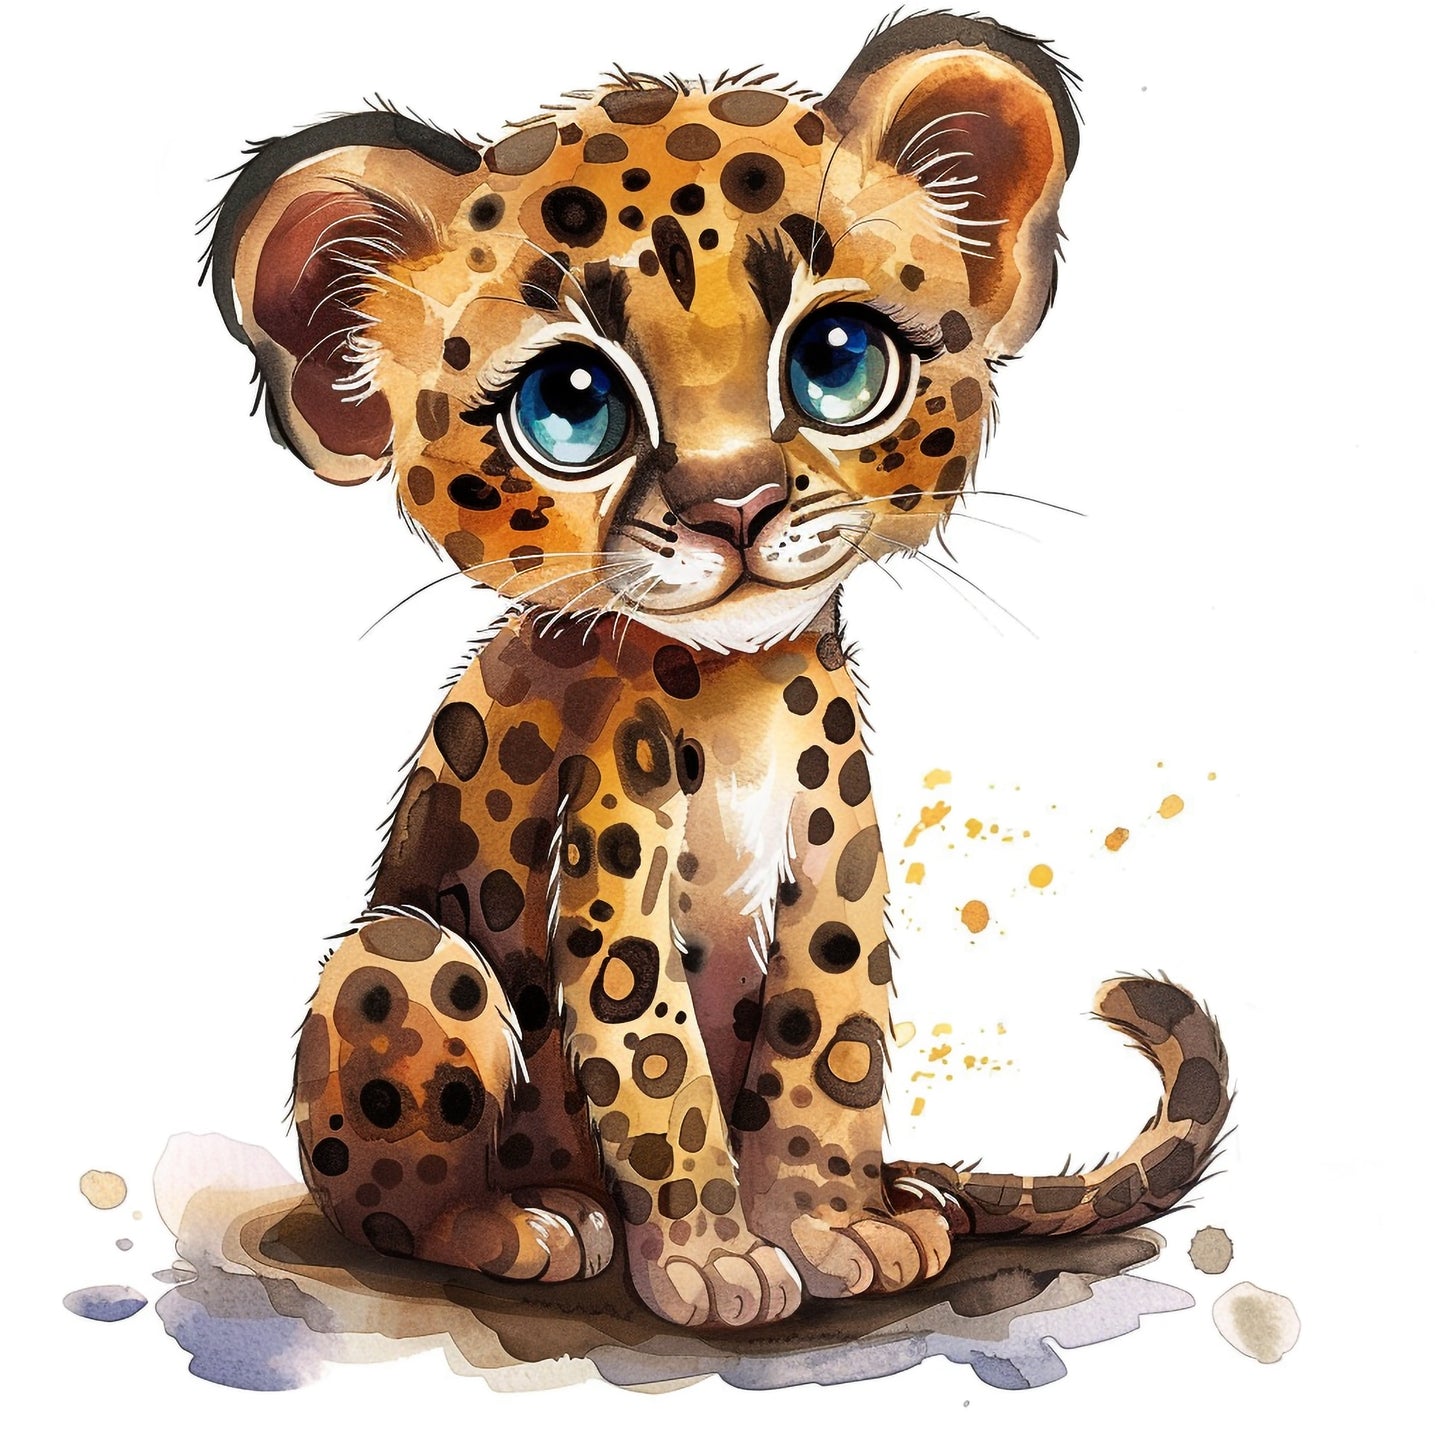 Adorable Cartoon Baby Panther in Watercolor Illustration